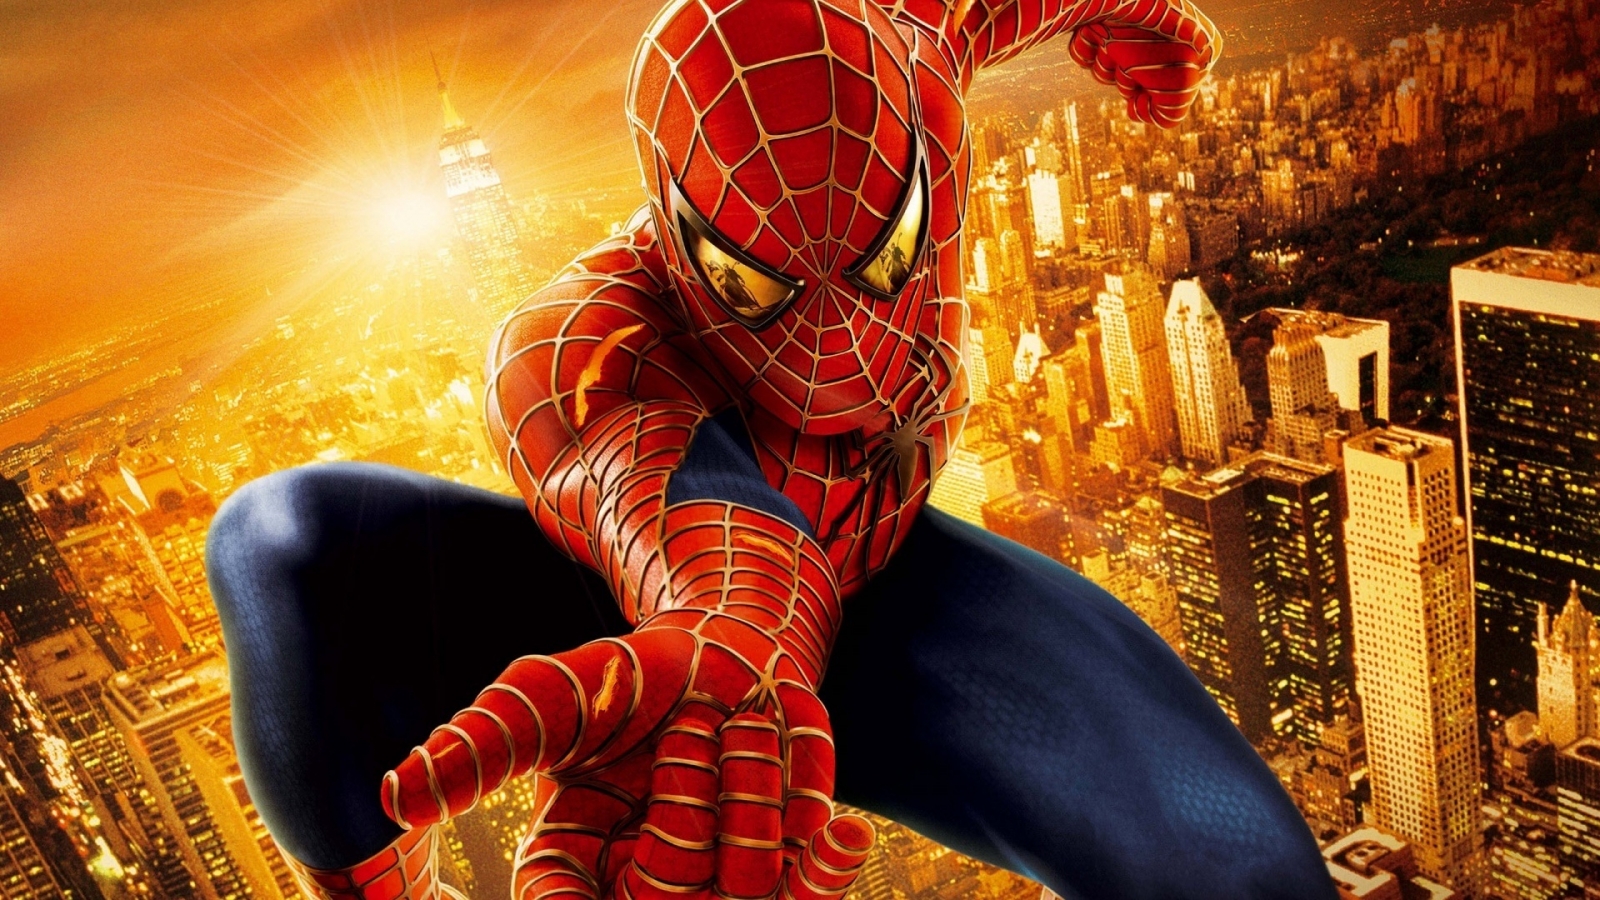 Spiderman Up for 1600 x 900 HDTV resolution